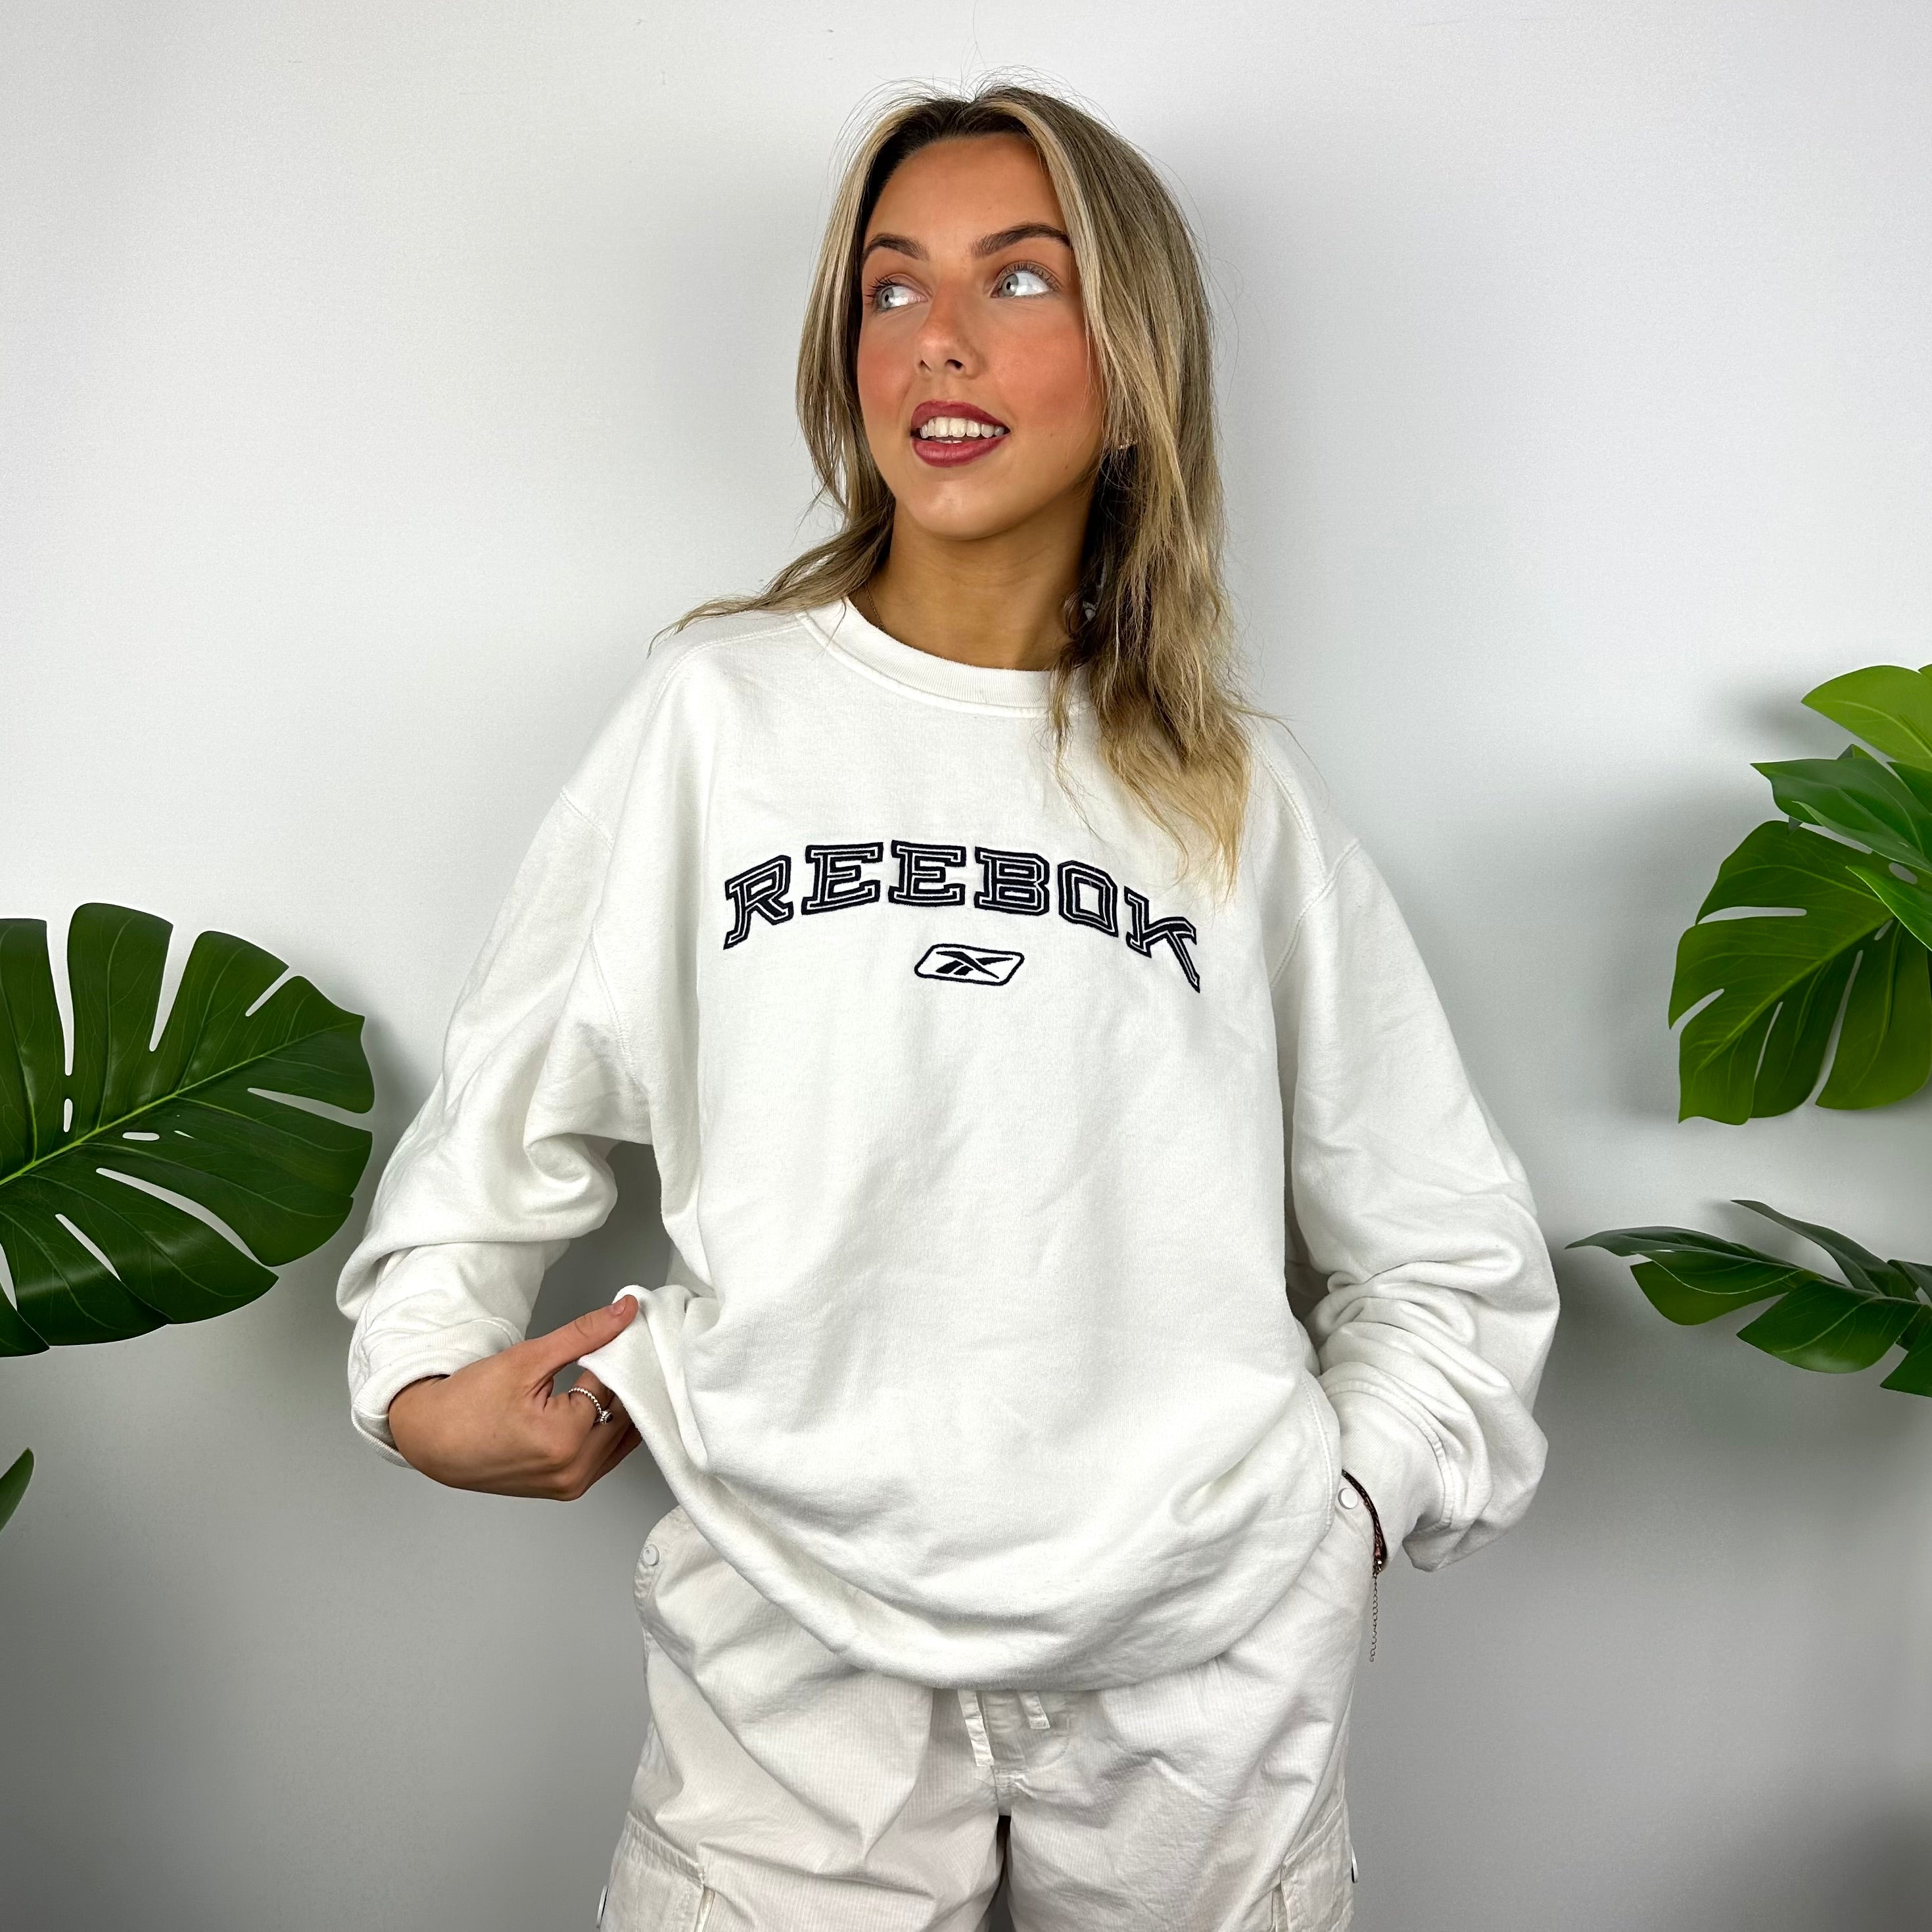 Reebok White Embroidered Spell Out Sweatshirt (L)